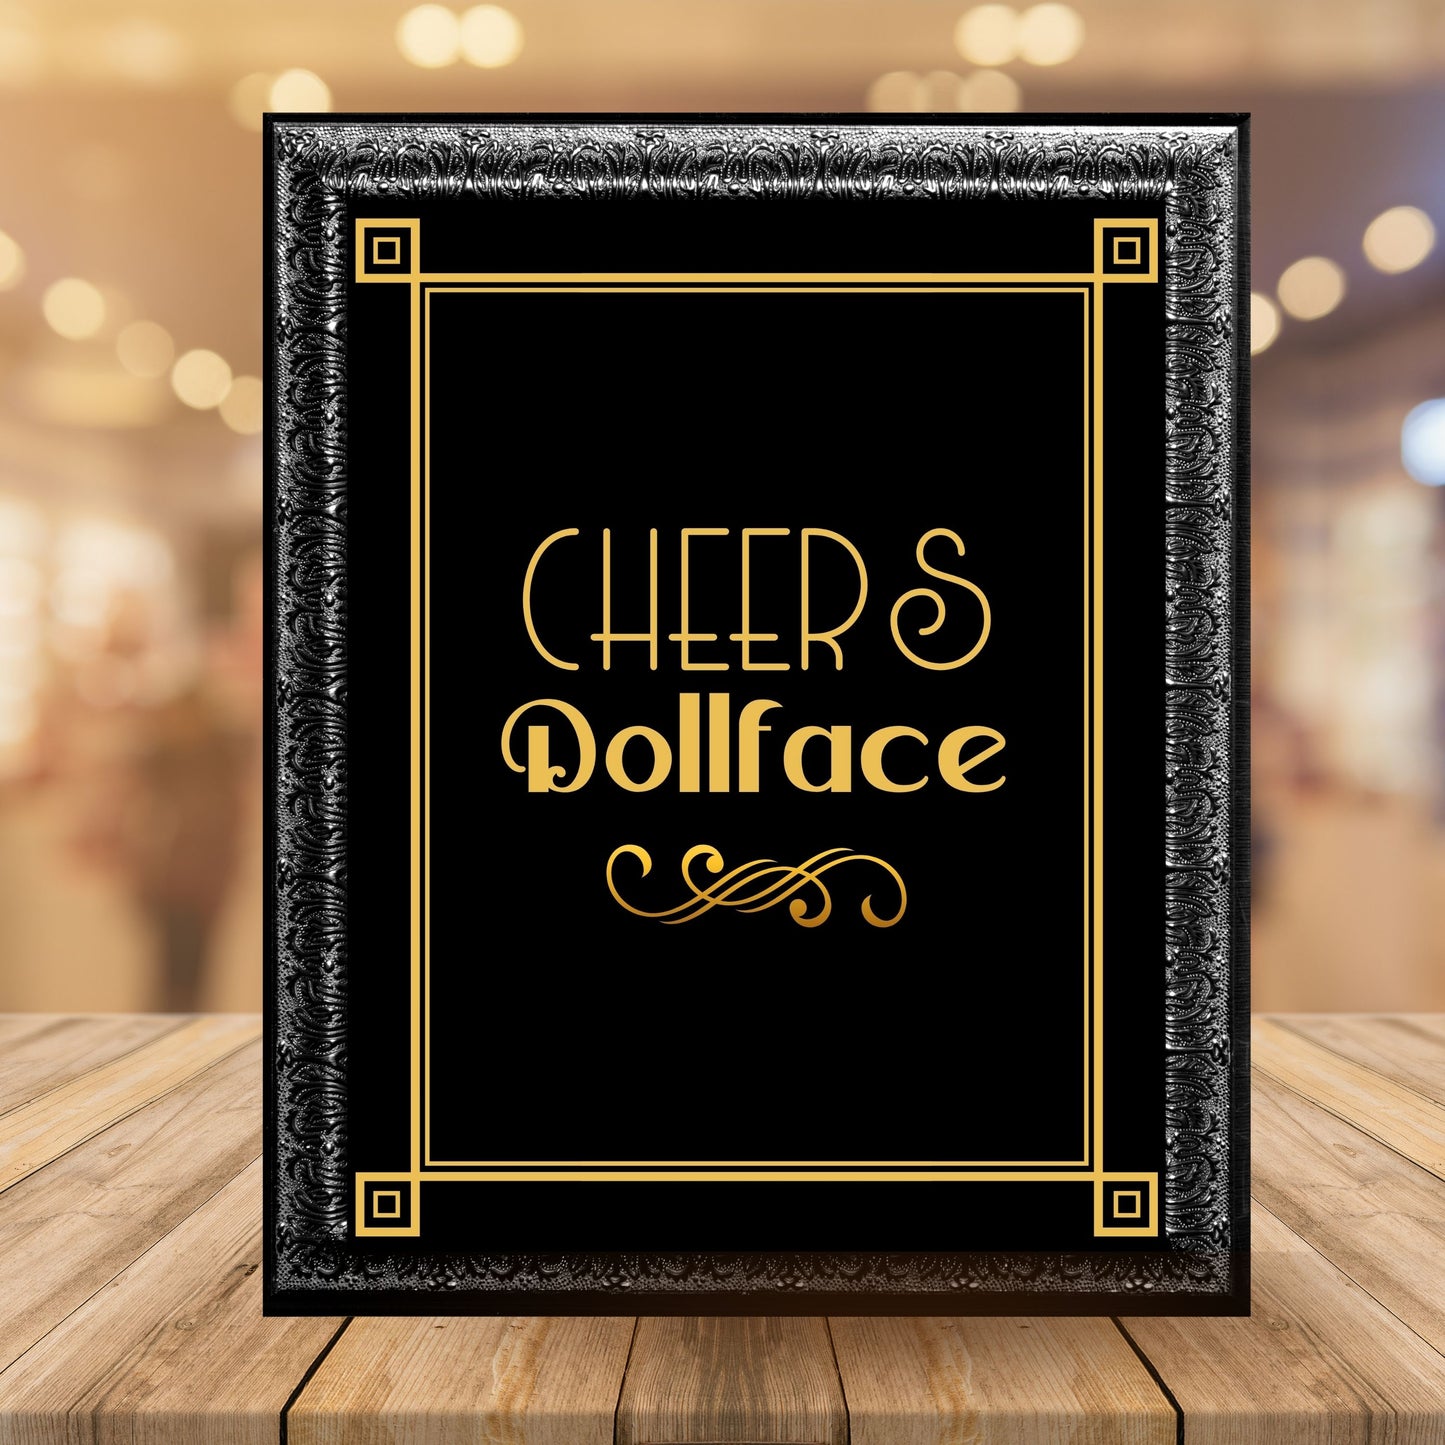 "Cheers Dollface" Printable Party Sign For Great Gatsby or Roaring 20's Party Or Wedding, Black & Gold, Printable Party Decor